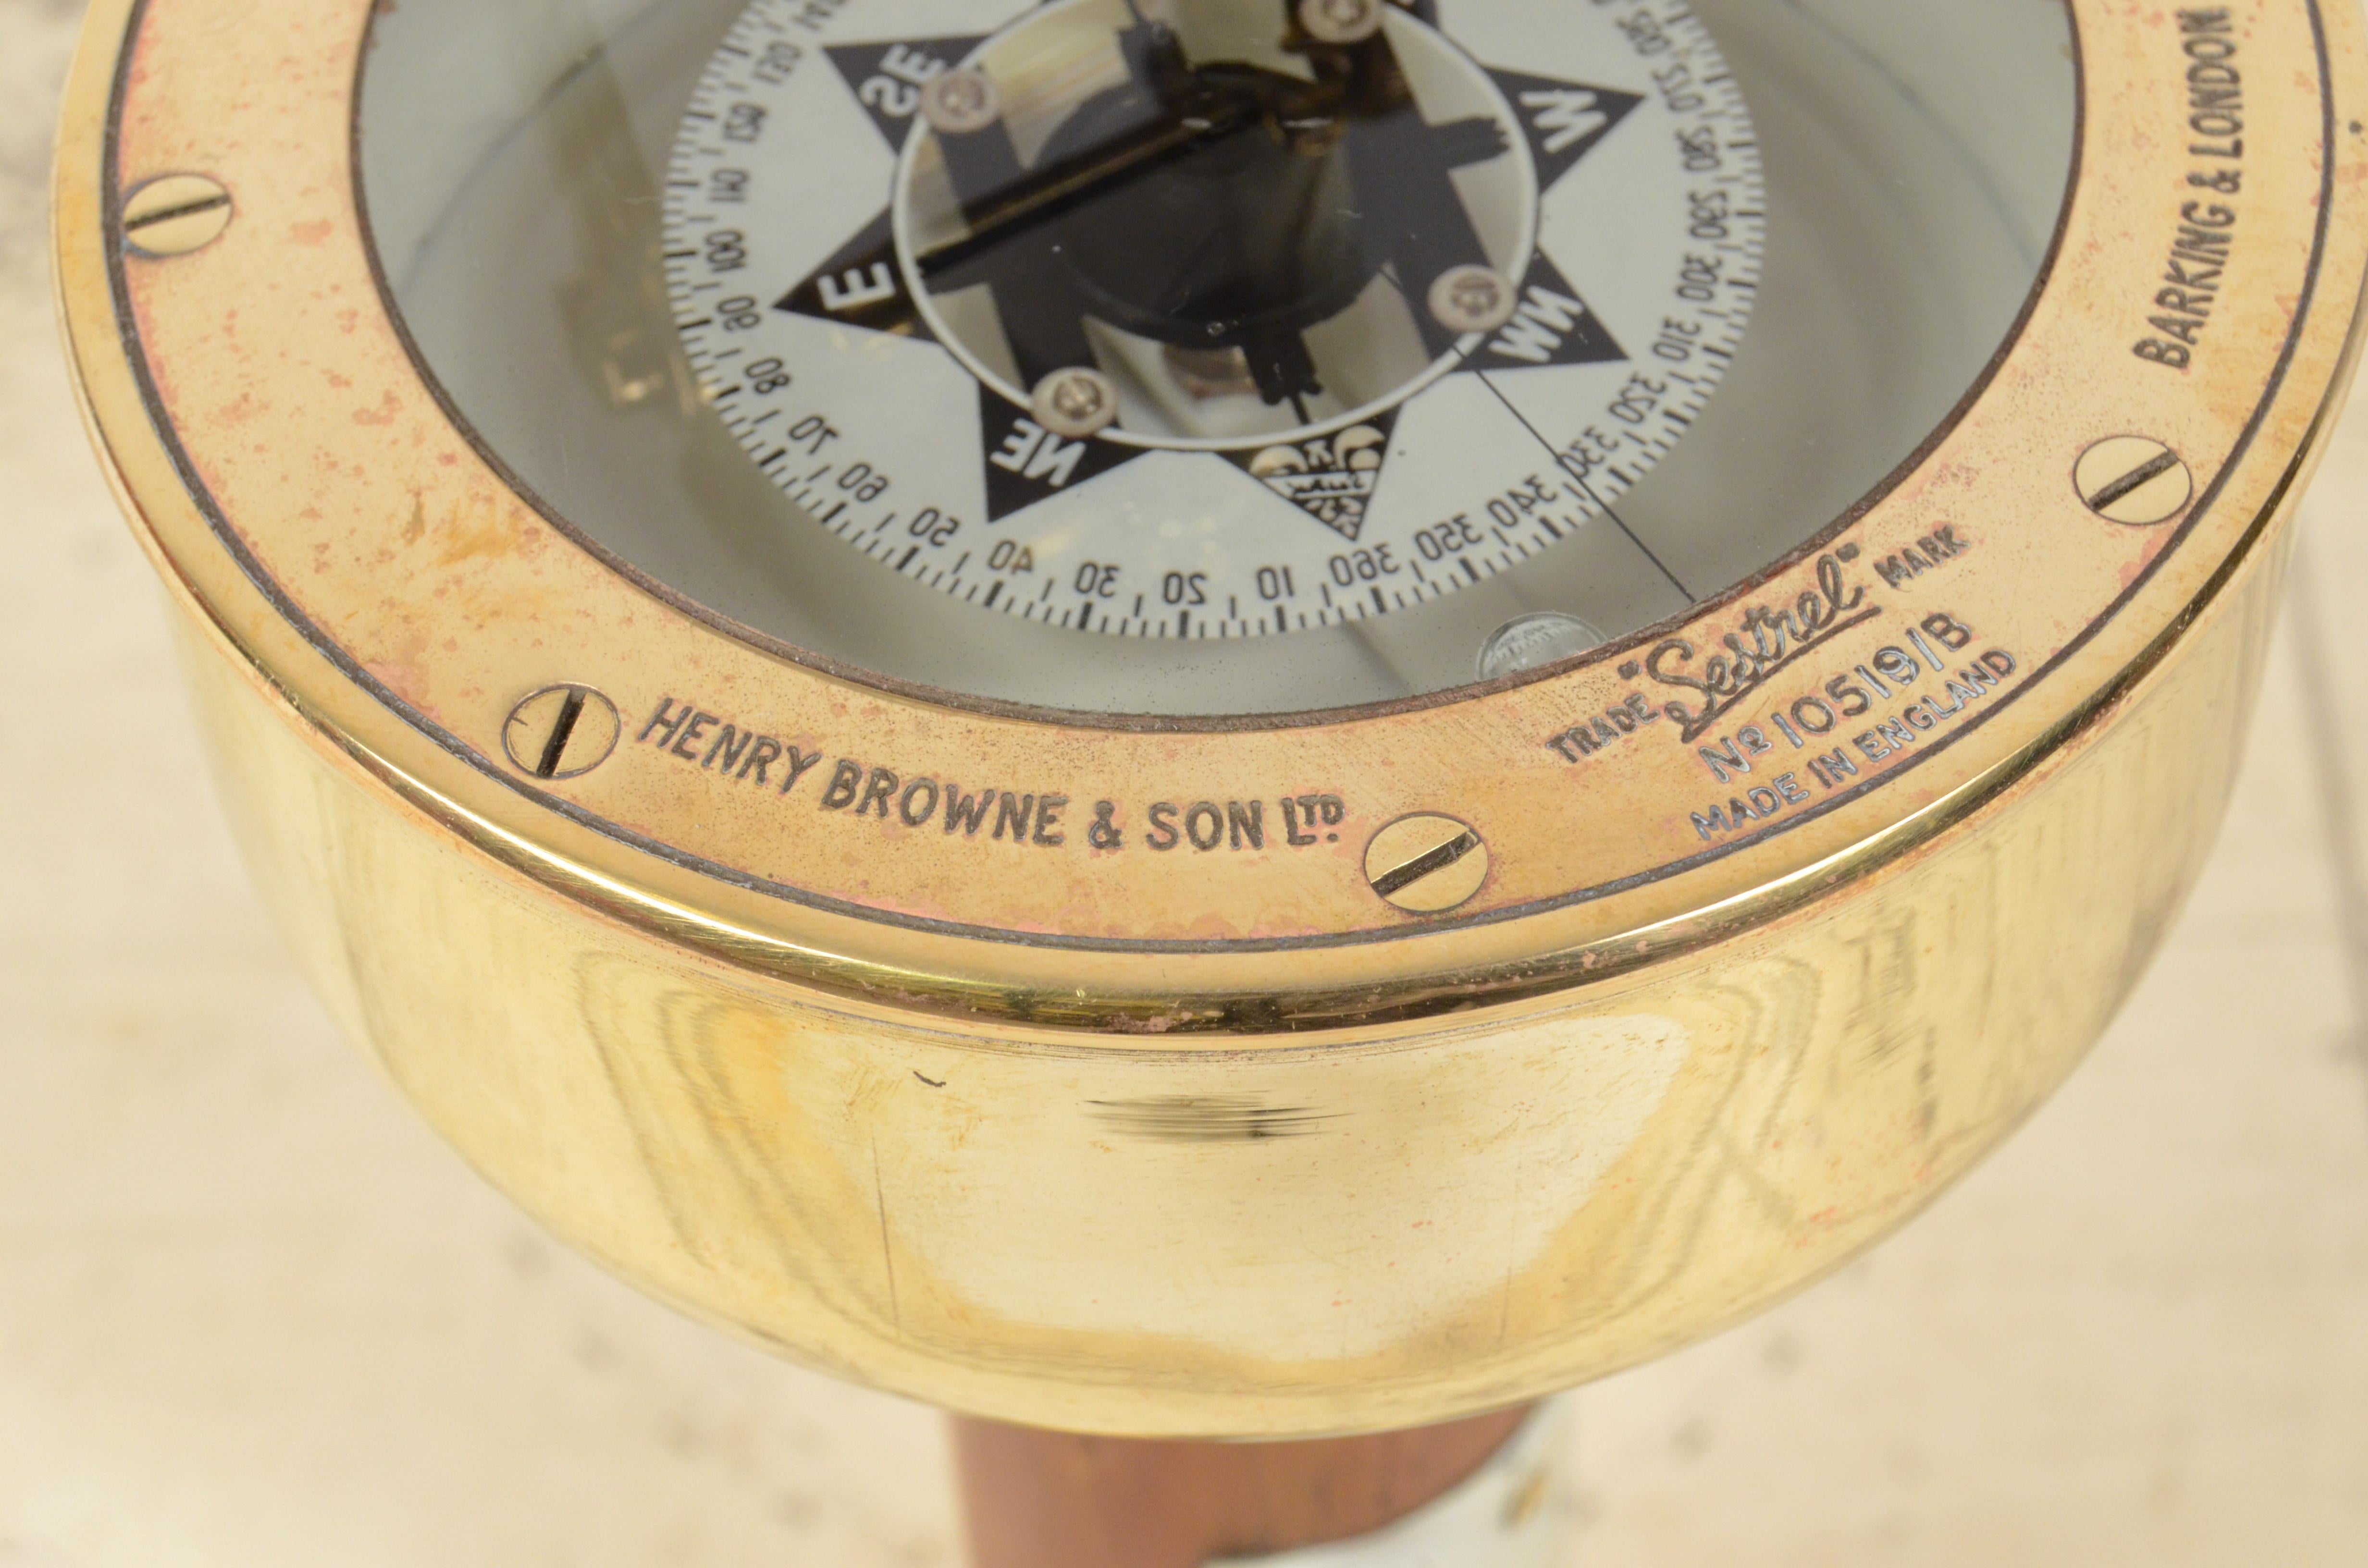 British Late 19th Century Nautical Hand-Held Magnetic Bearing Compass H. Browne Sestrel